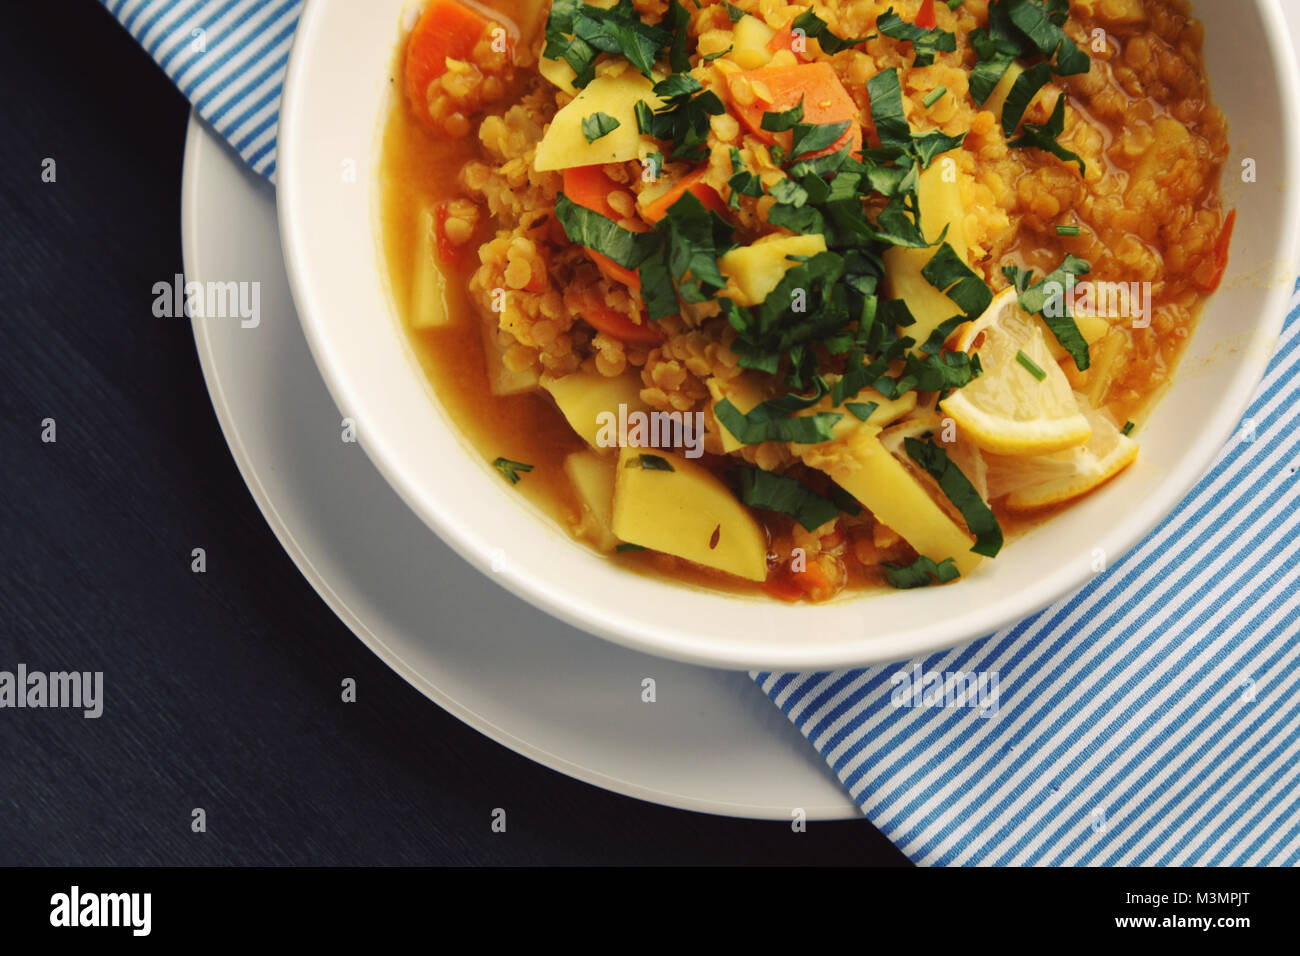 Red lentil stew on the round white plate. Top view. Vegan dish with potato, carrot and turmeric. European cuisine. Vegetarian lunch. Stock Photo